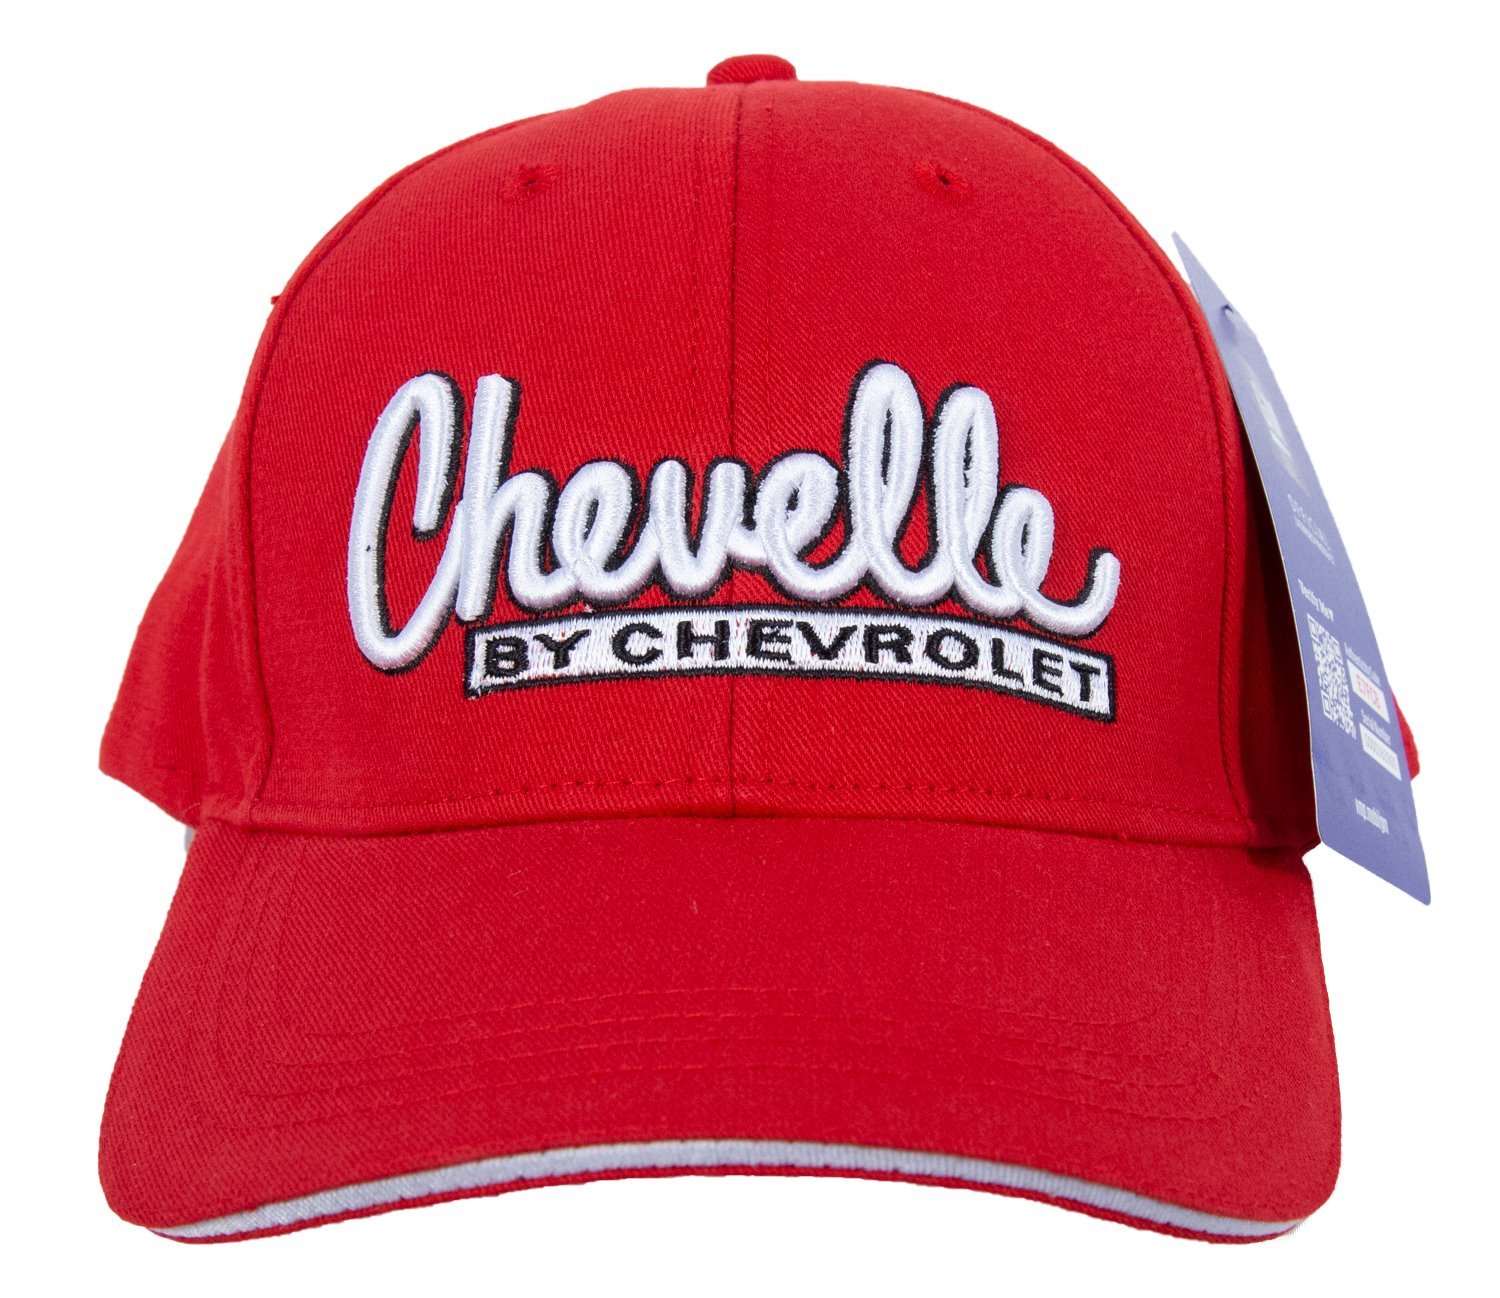 JEGS H239 "Chevelle by Chevrolet" Hat